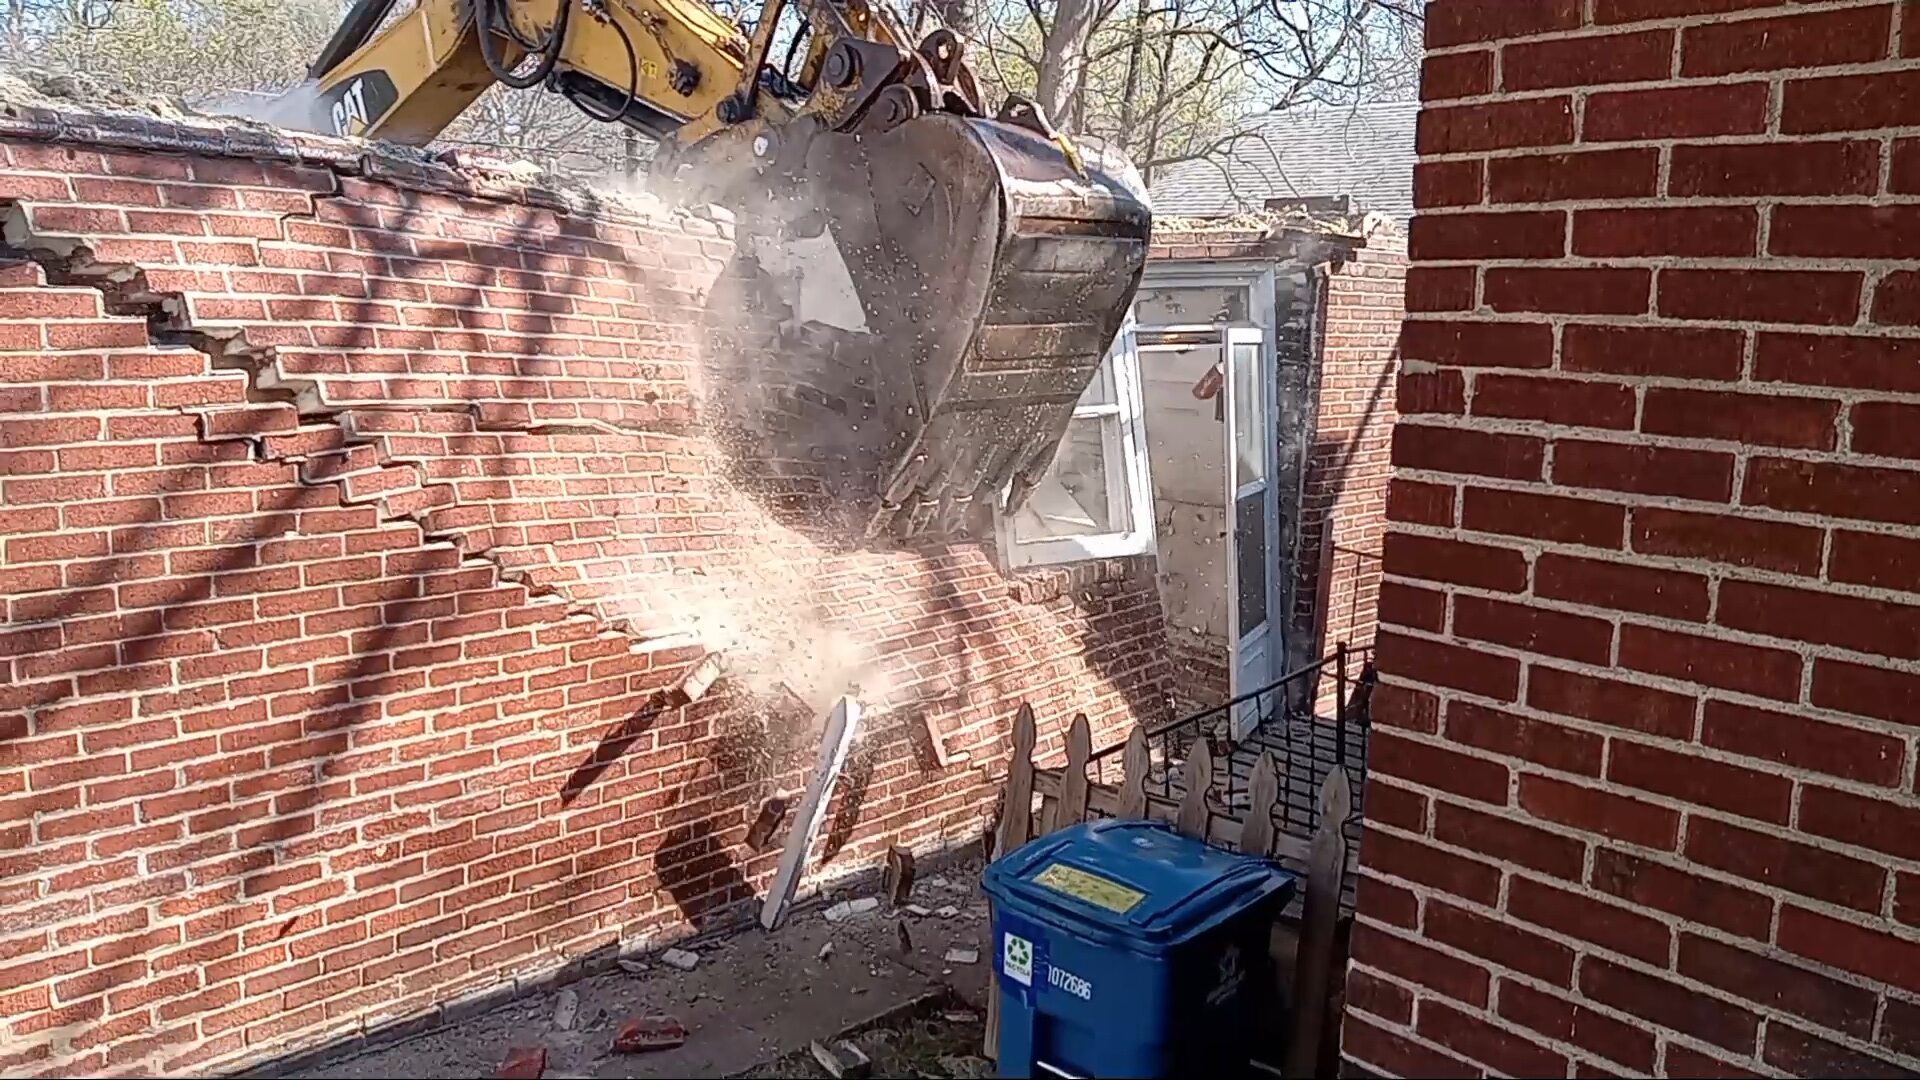 More photos of house demolished on Lyndover, taken by neighbor as it came down